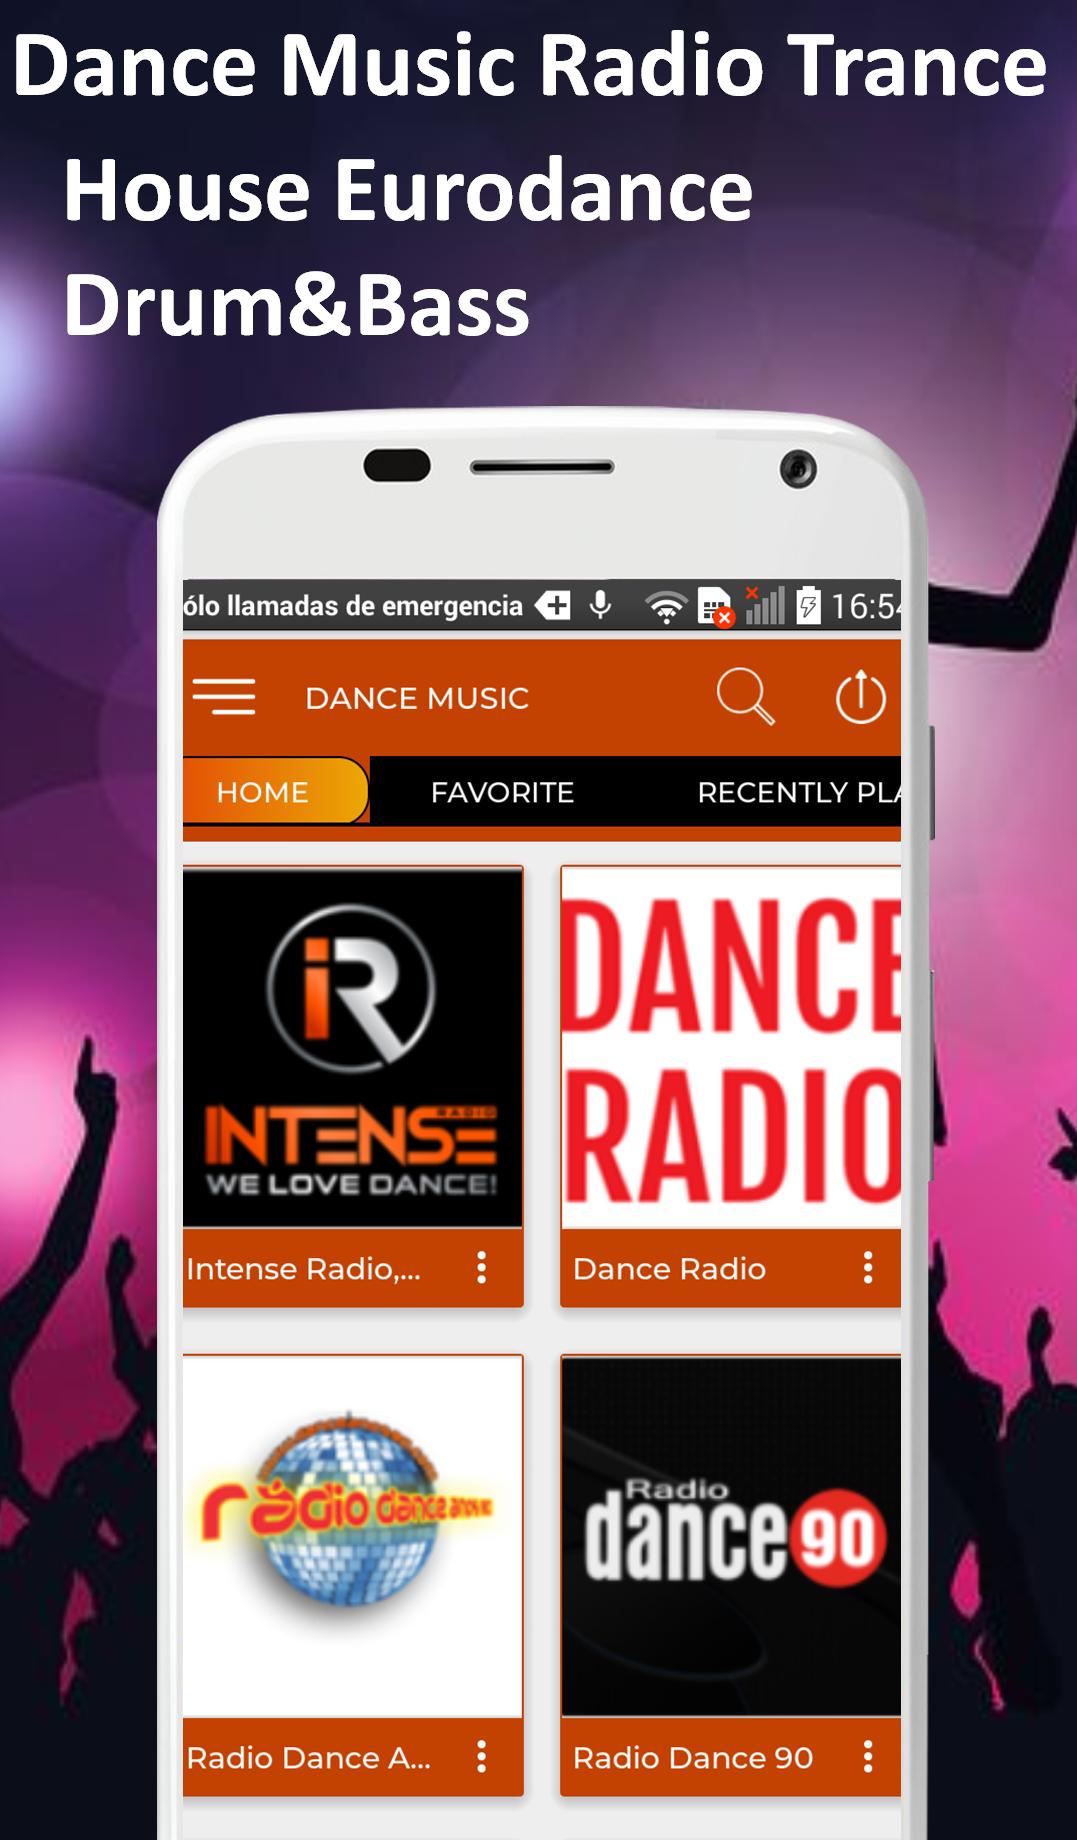 Dance Music Radio Eurodance for Android - APK Download